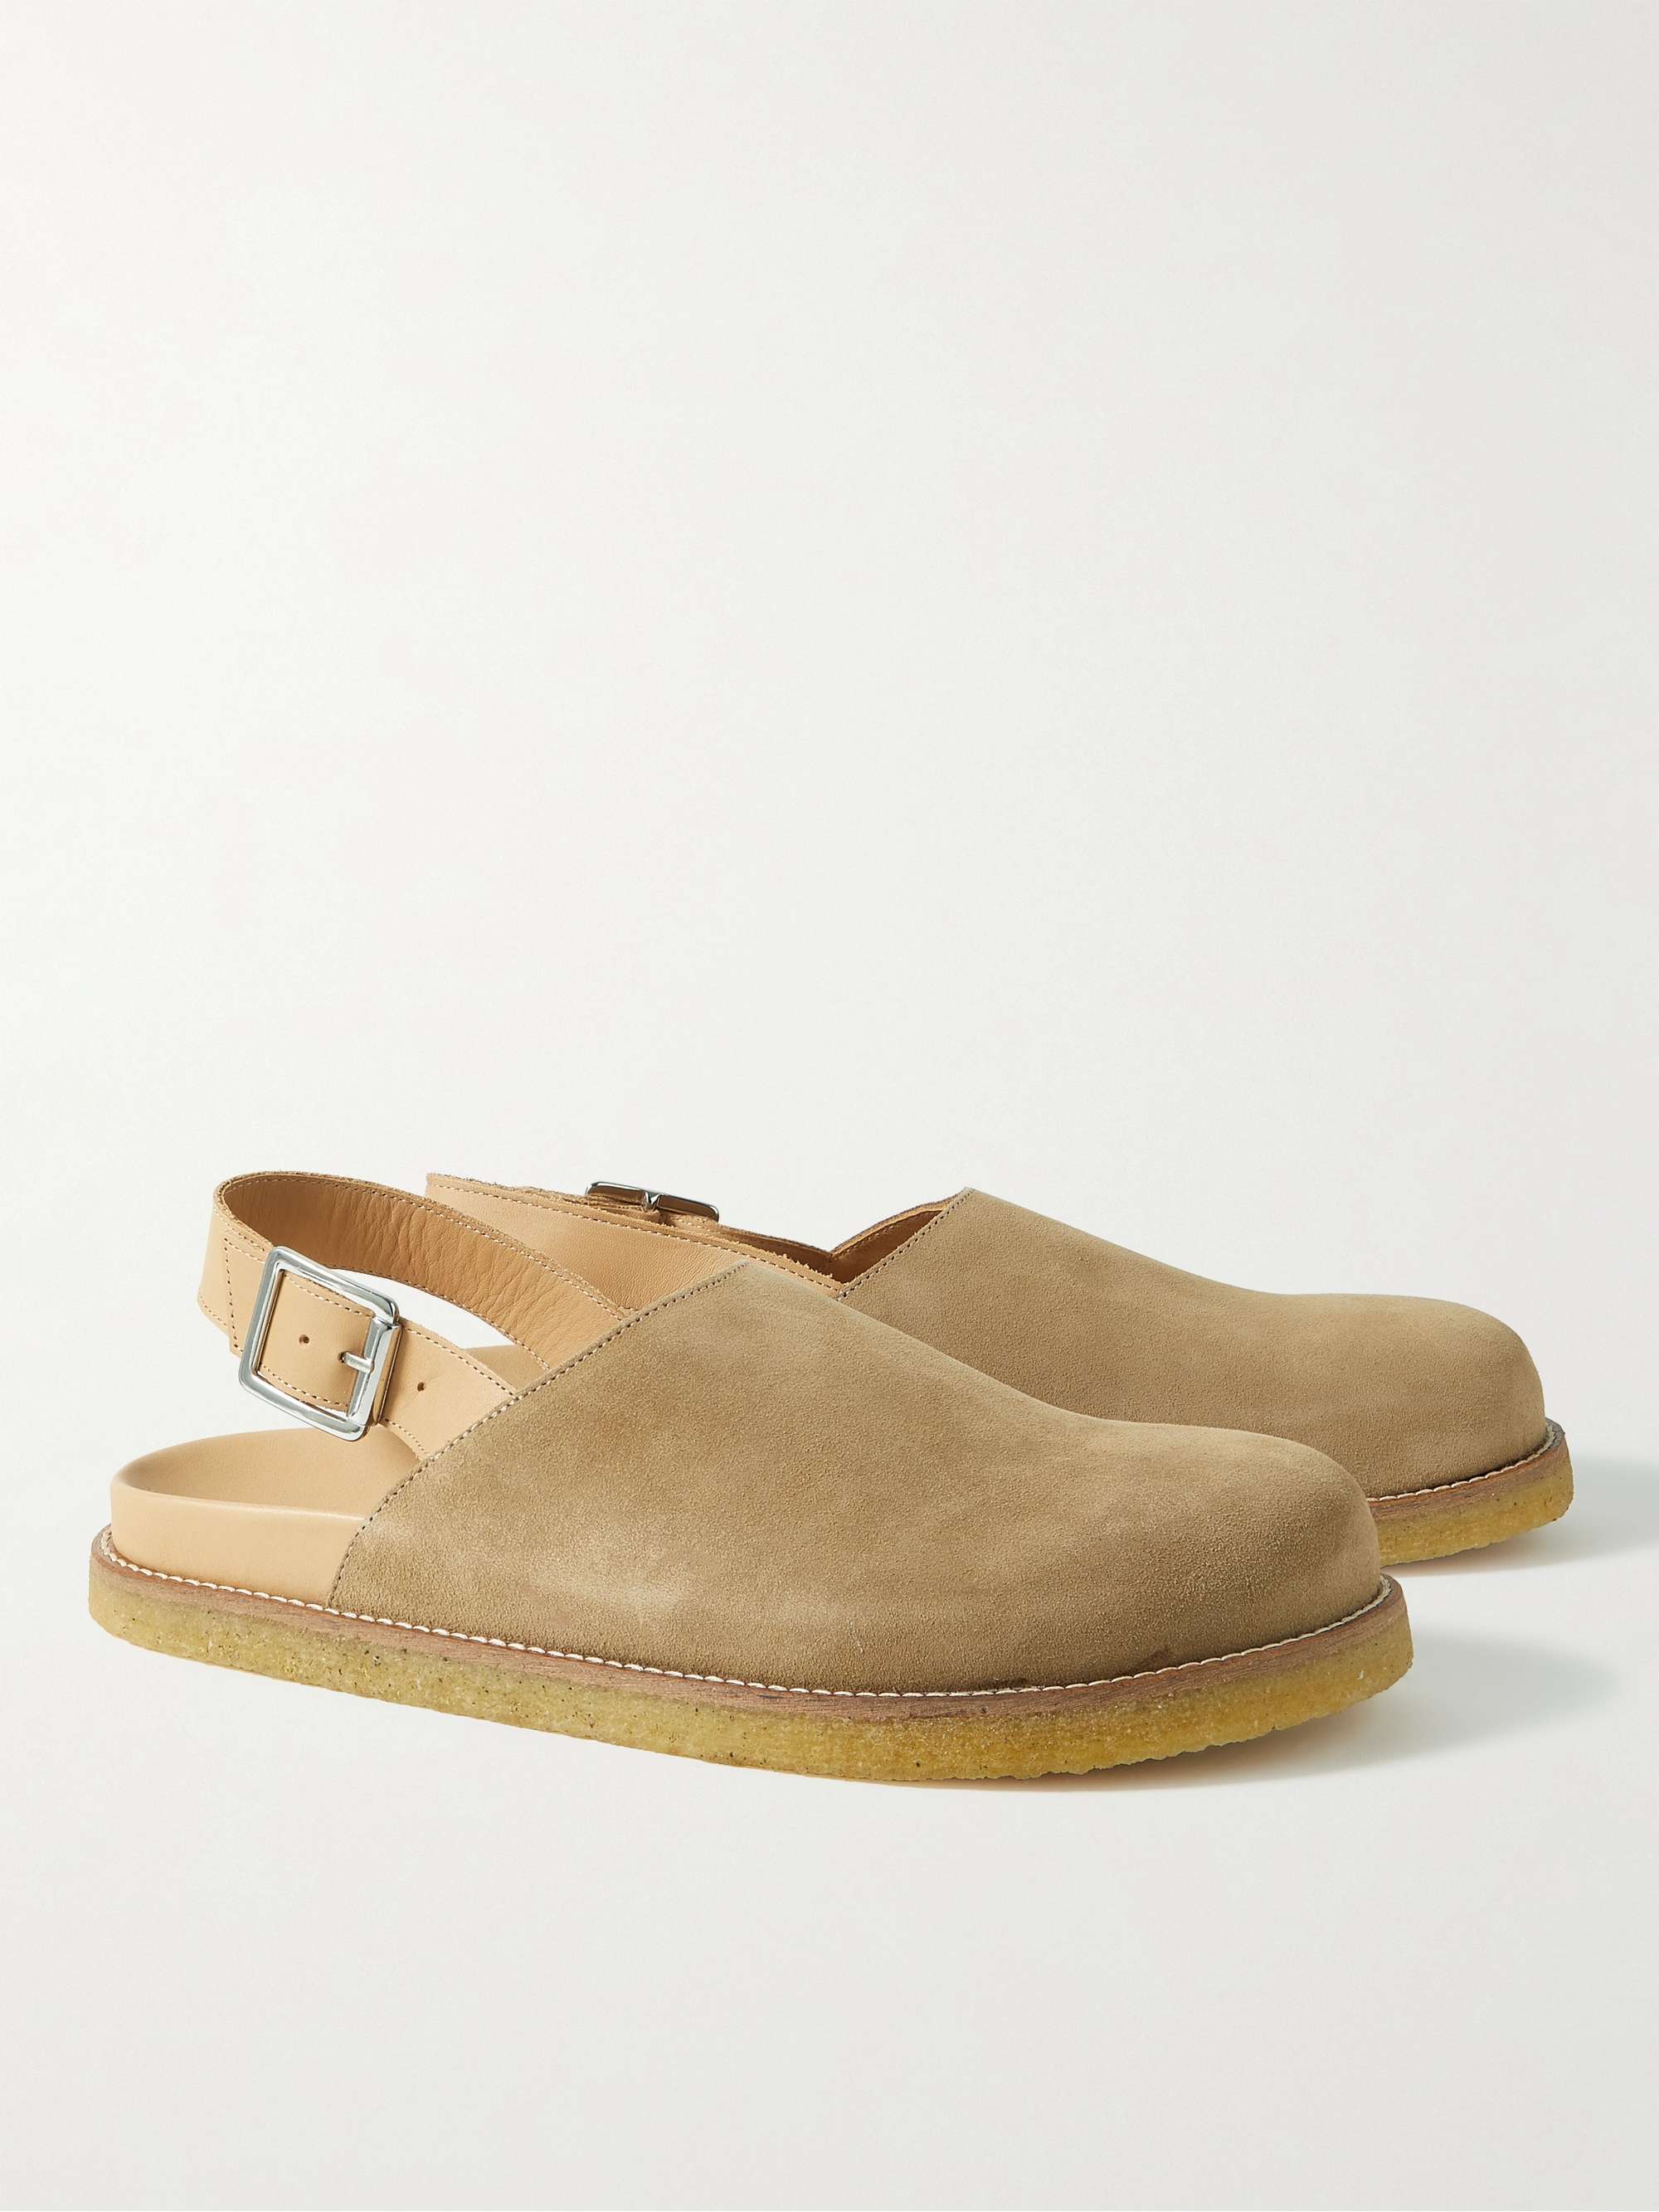 VINNY'S Leather-Trimmed Suede Mules